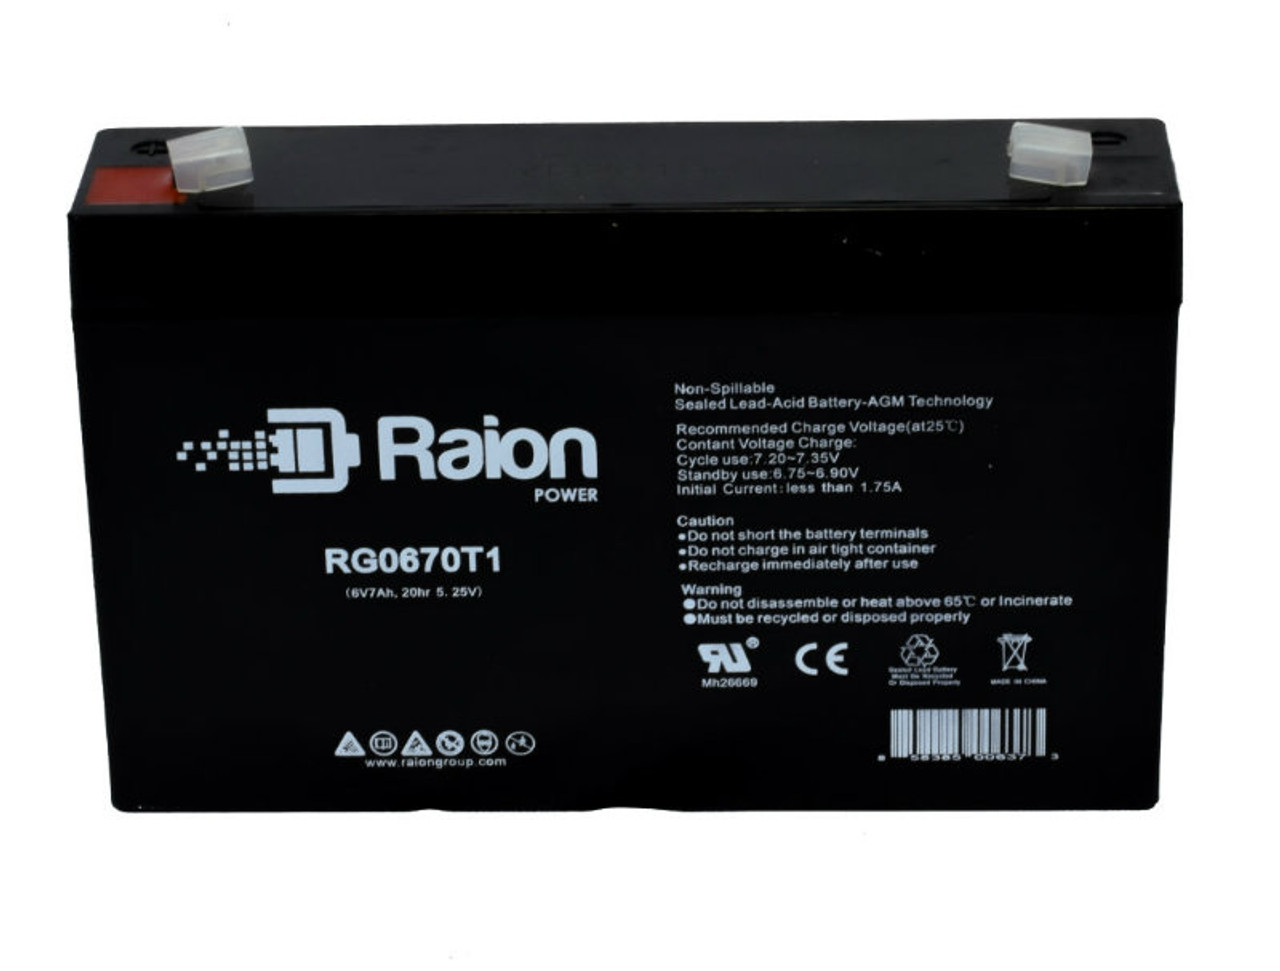 Raion Power RG0670T1 Replacement Battery Cartridge for Japan PE6V6.5